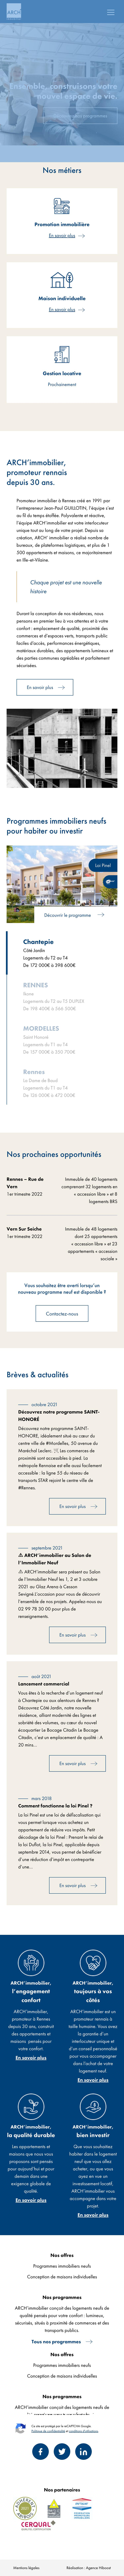 Archimmobilier Responsive